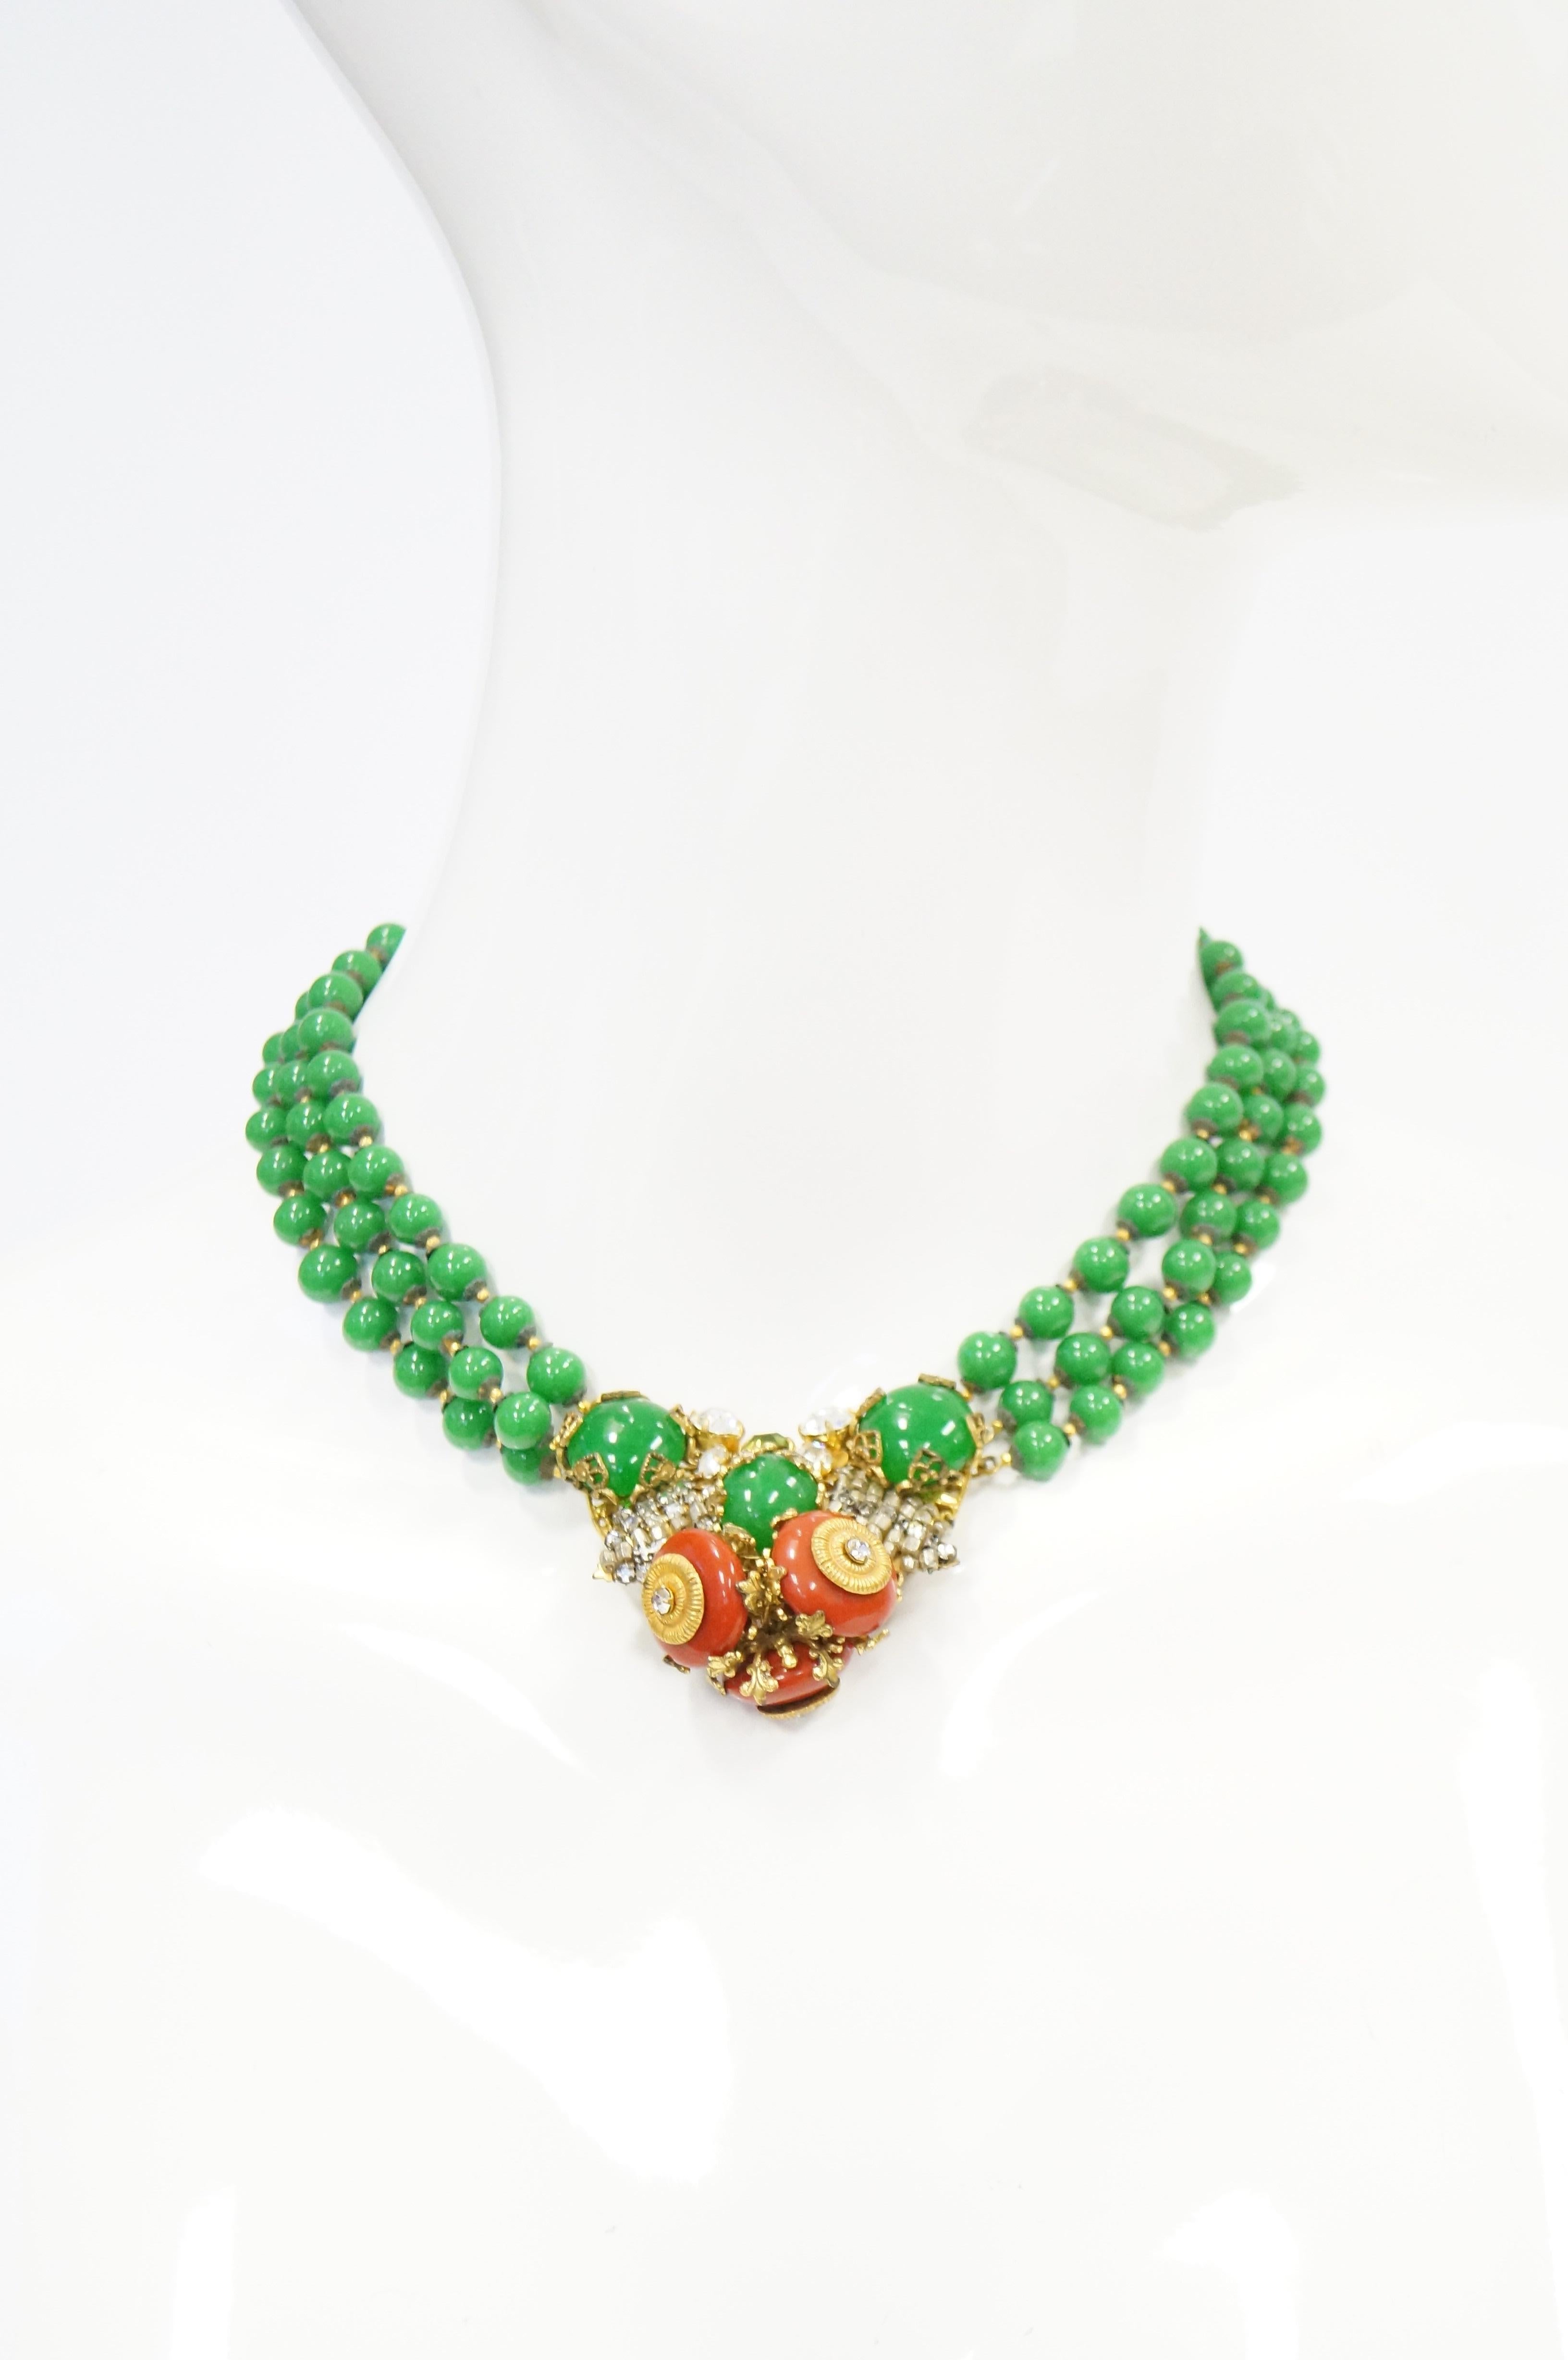 1950s Miriam Haskell Green and Umber Glass and Rhinestone Floral Choker 6